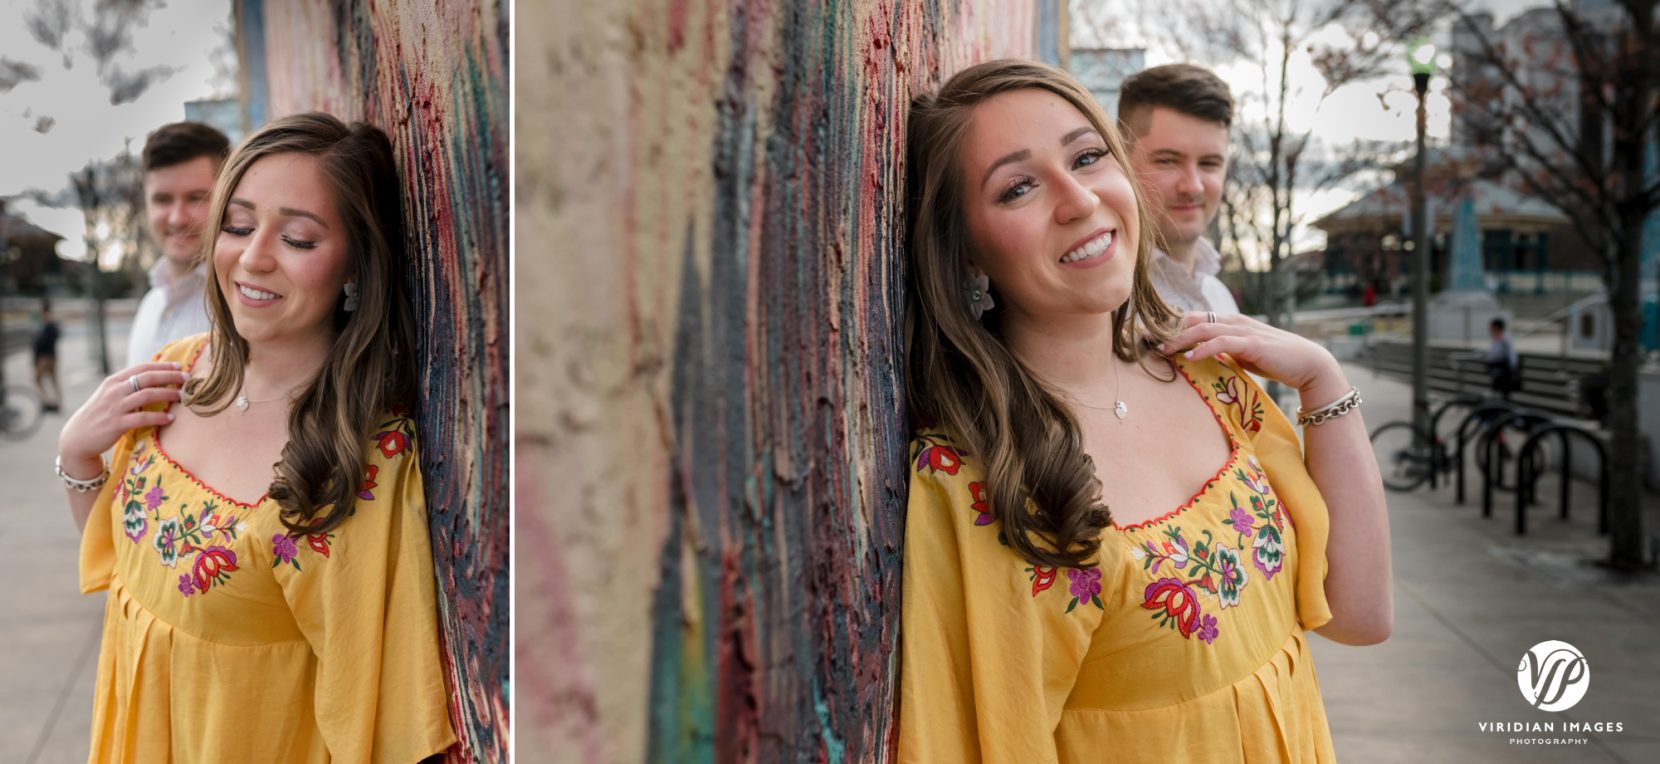 couple photographed against mural. focus on girl